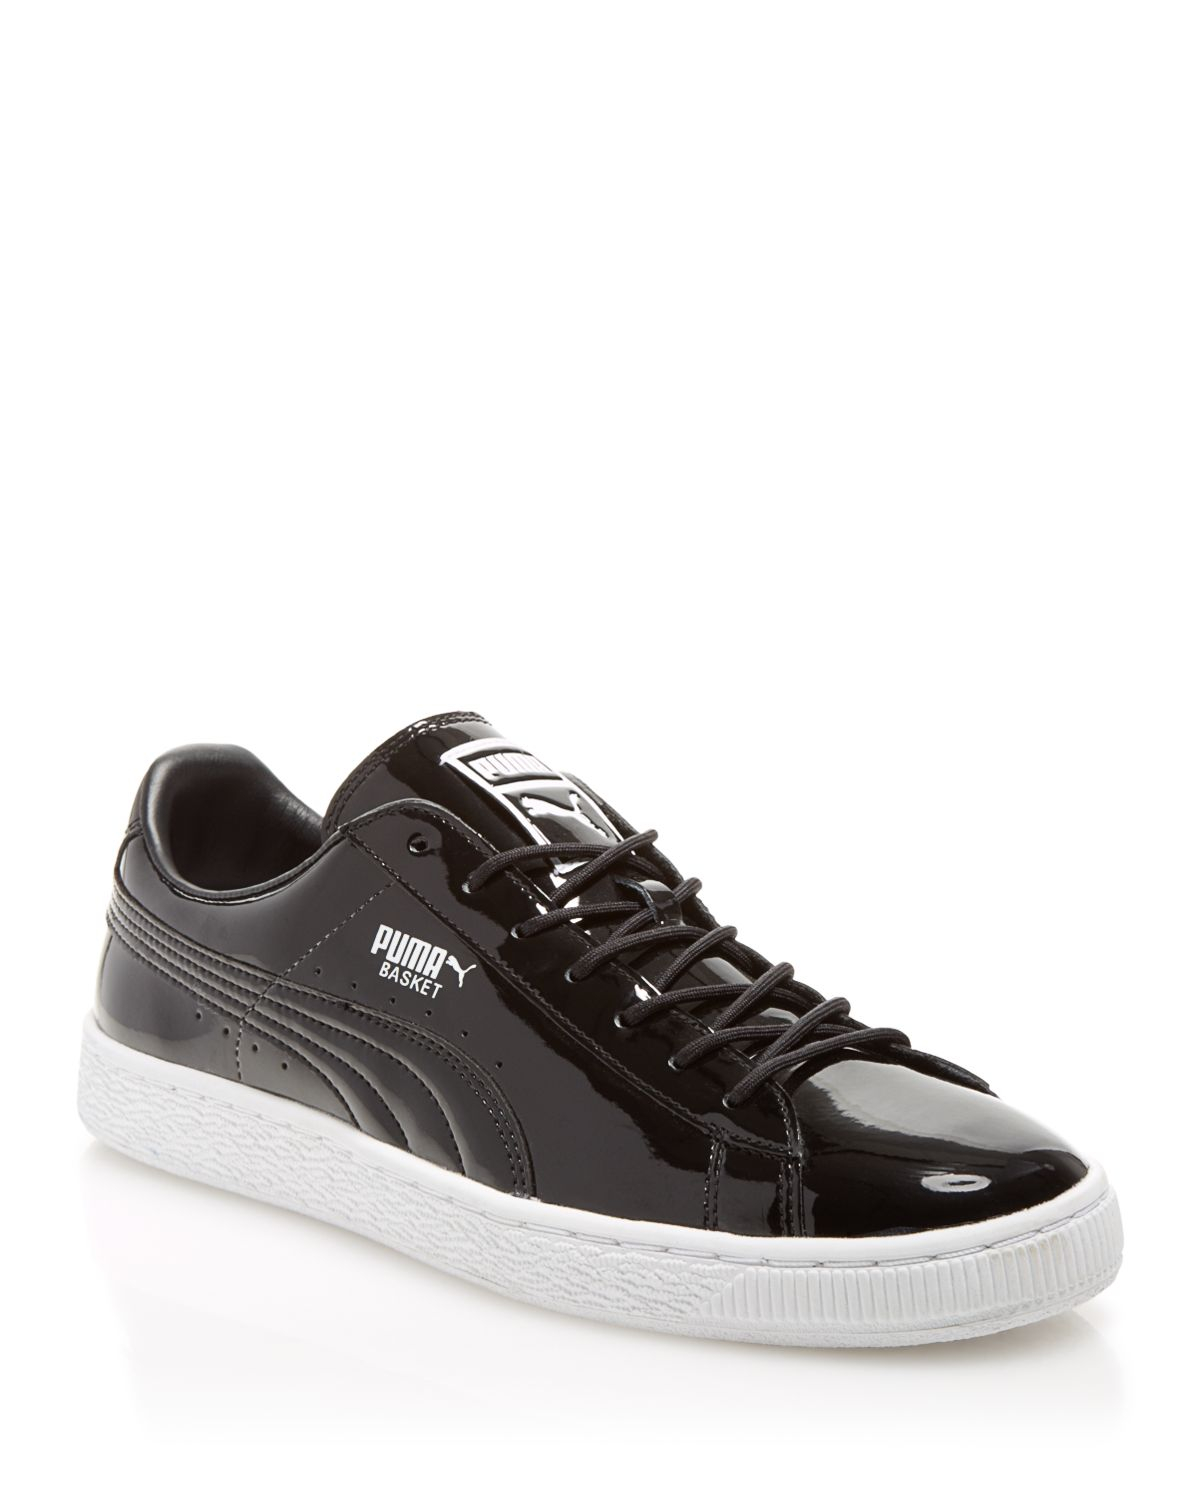 PUMA Basket Patent Leather Sneakers in Black for Men | Lyst